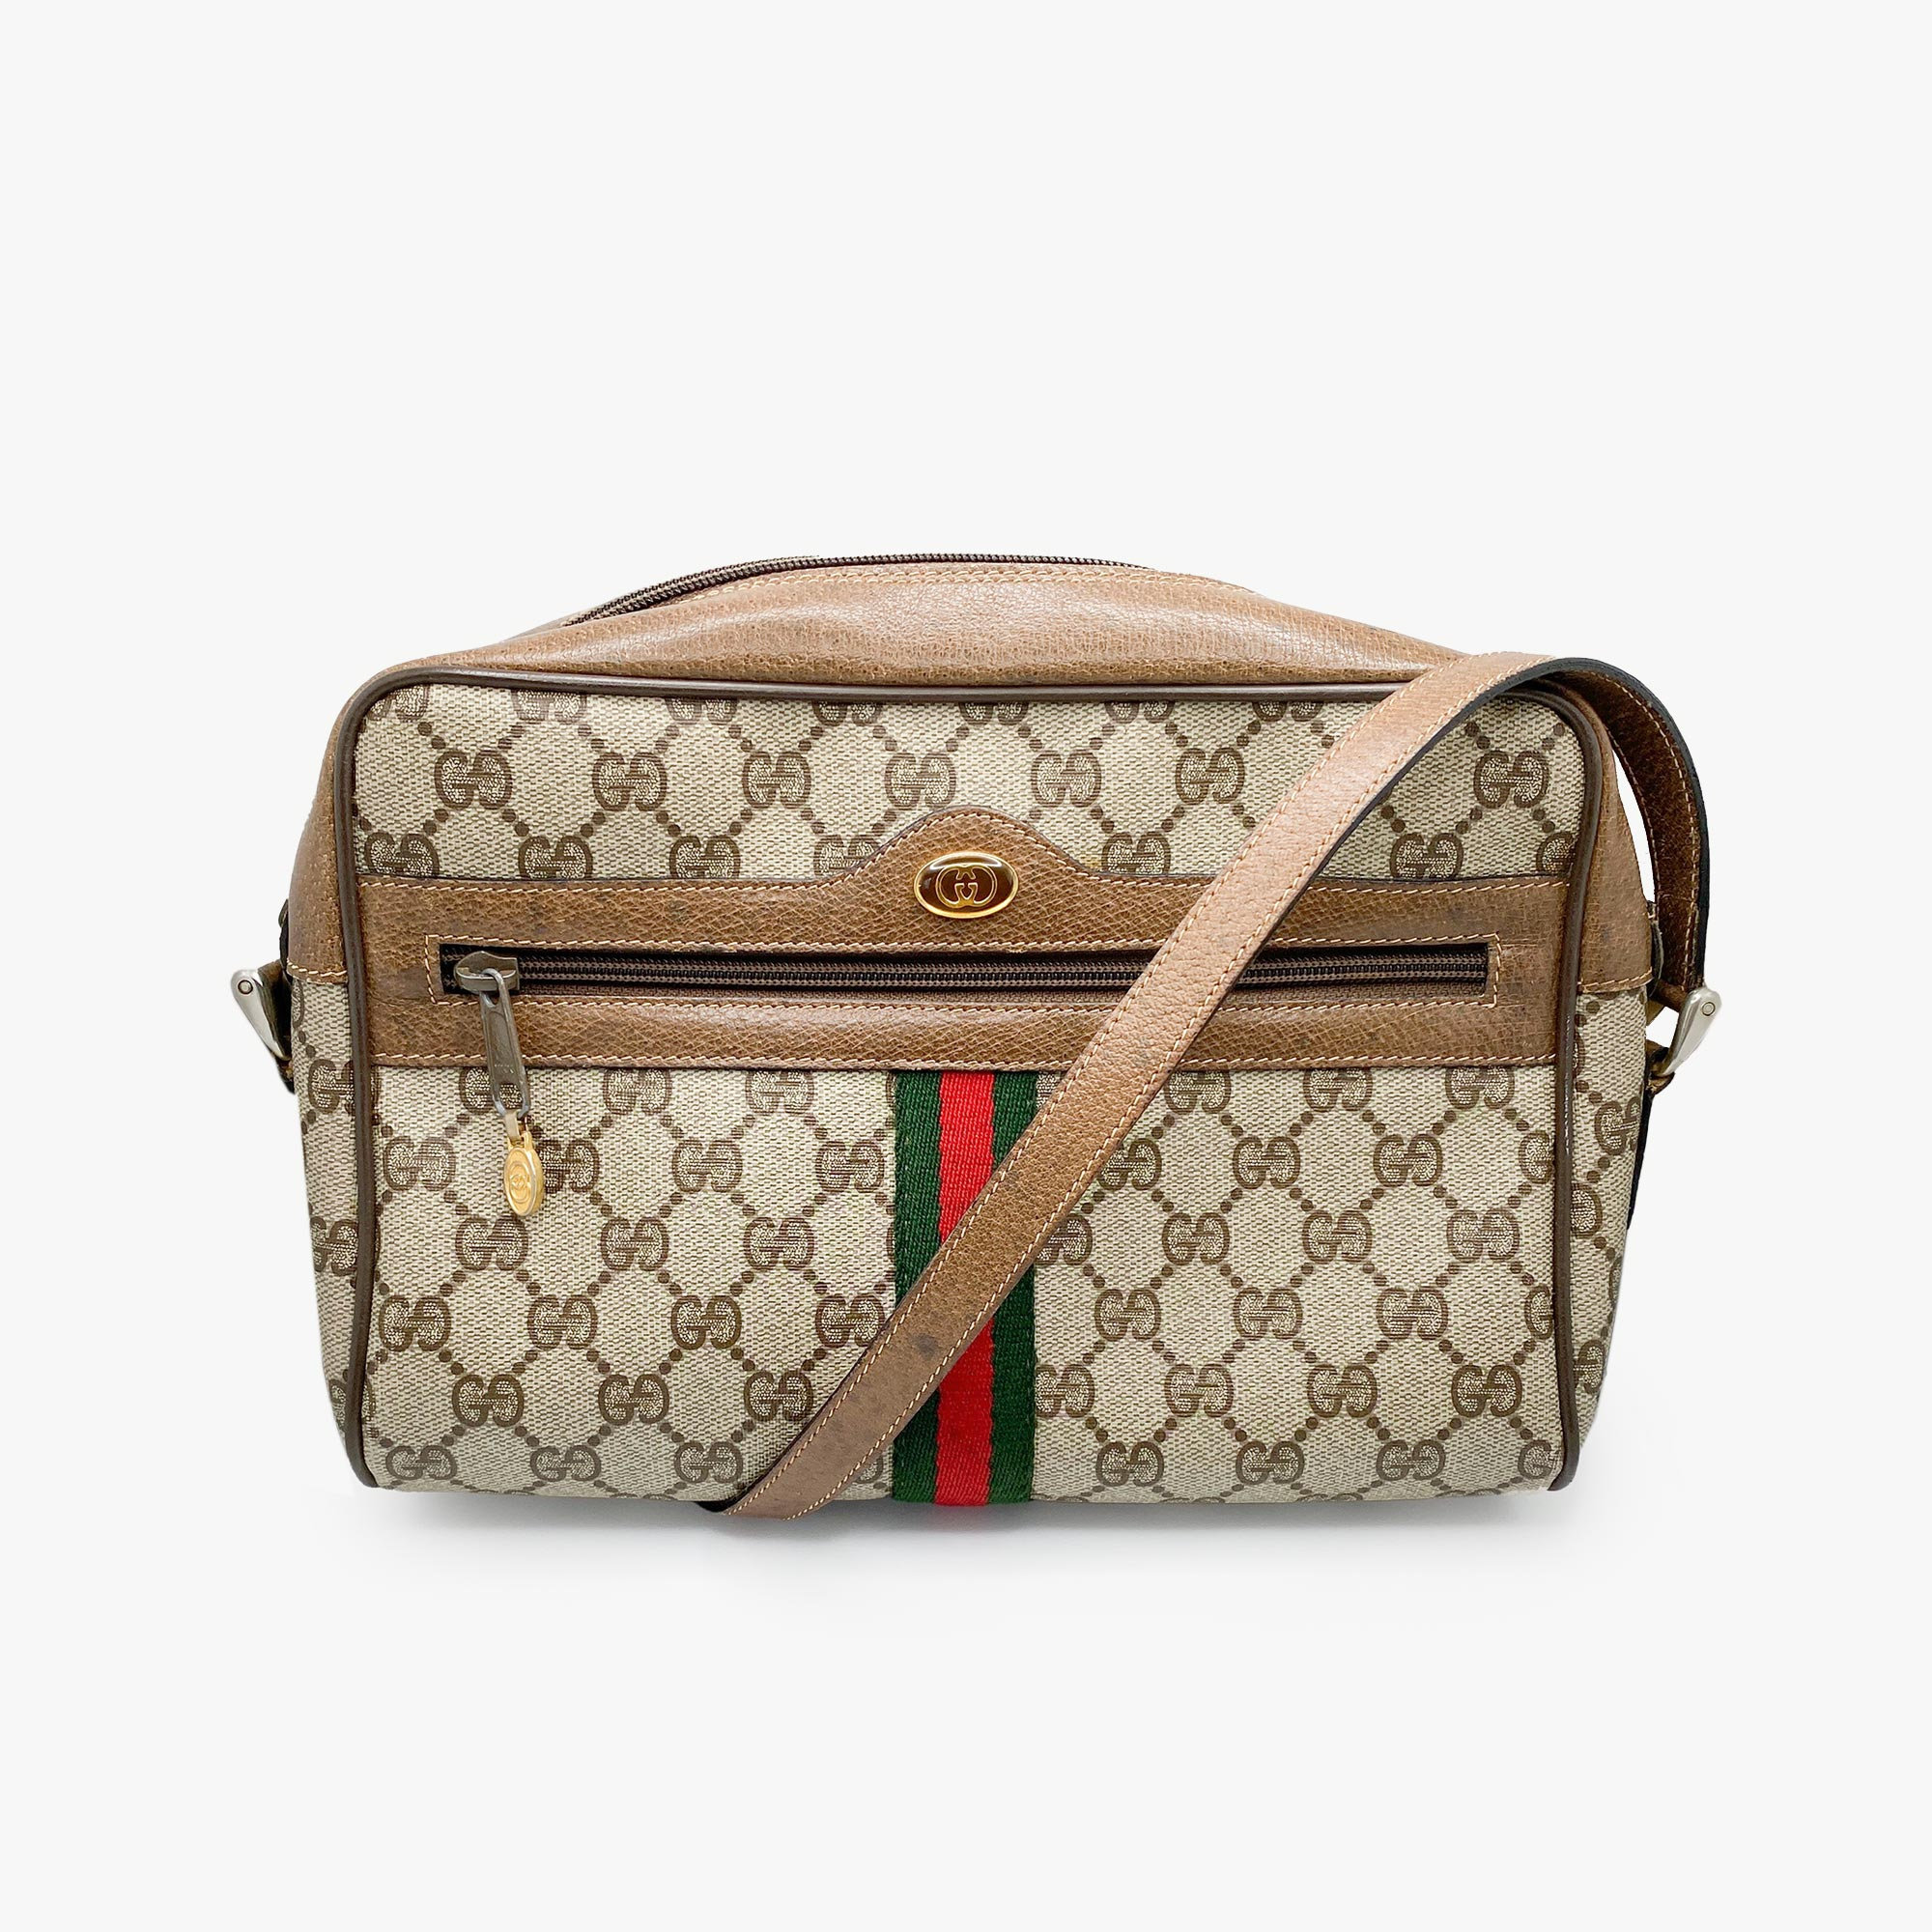 GUCCI-GG-Plus-Leather-Shoulder-Bag-Pouch-Beige-Brown-201538 – dct